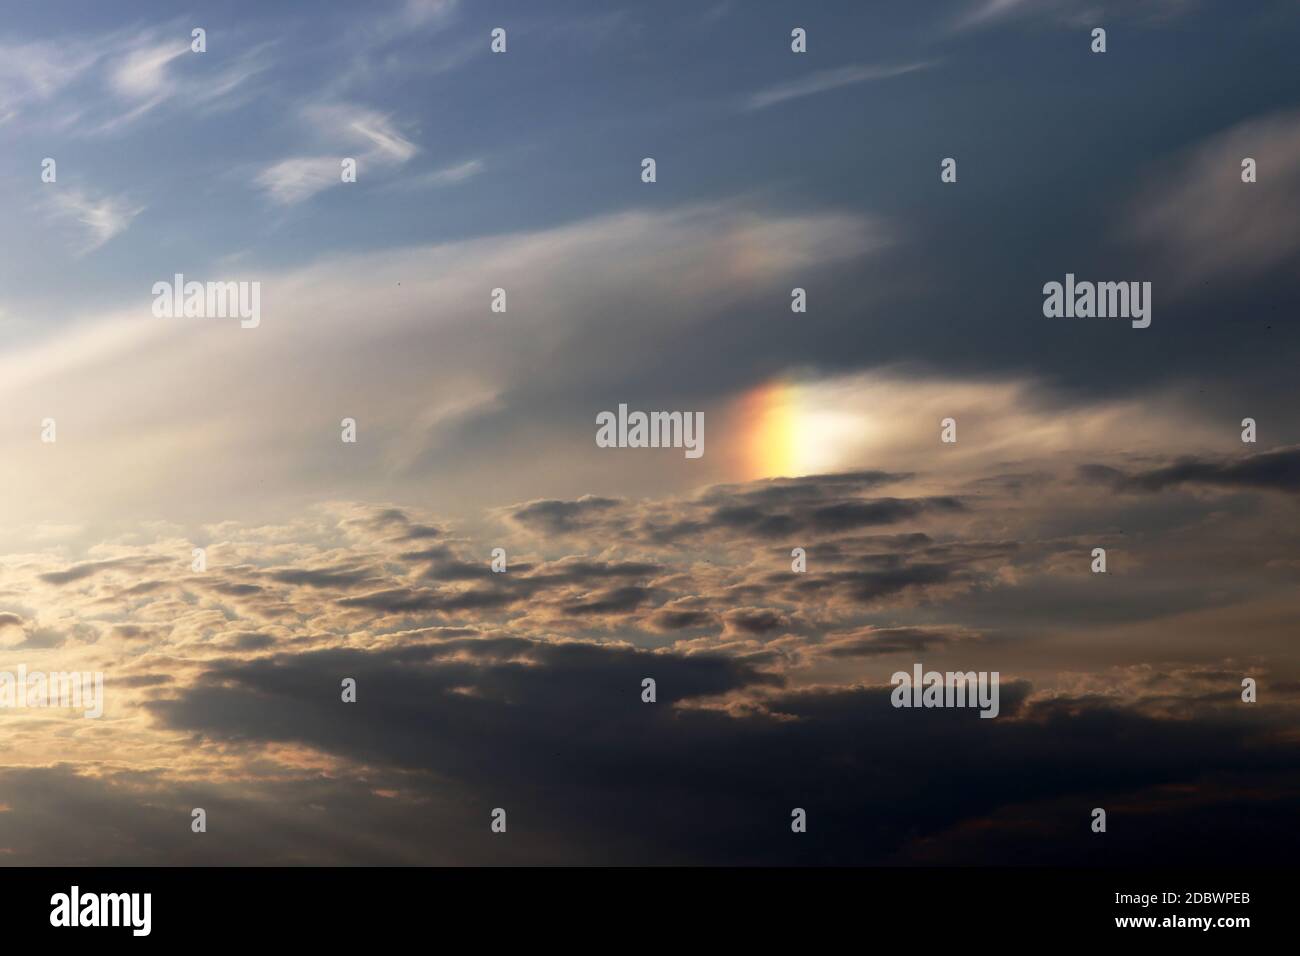 A part of a halo (light effect) in the evening sky between clouds Stock Photo